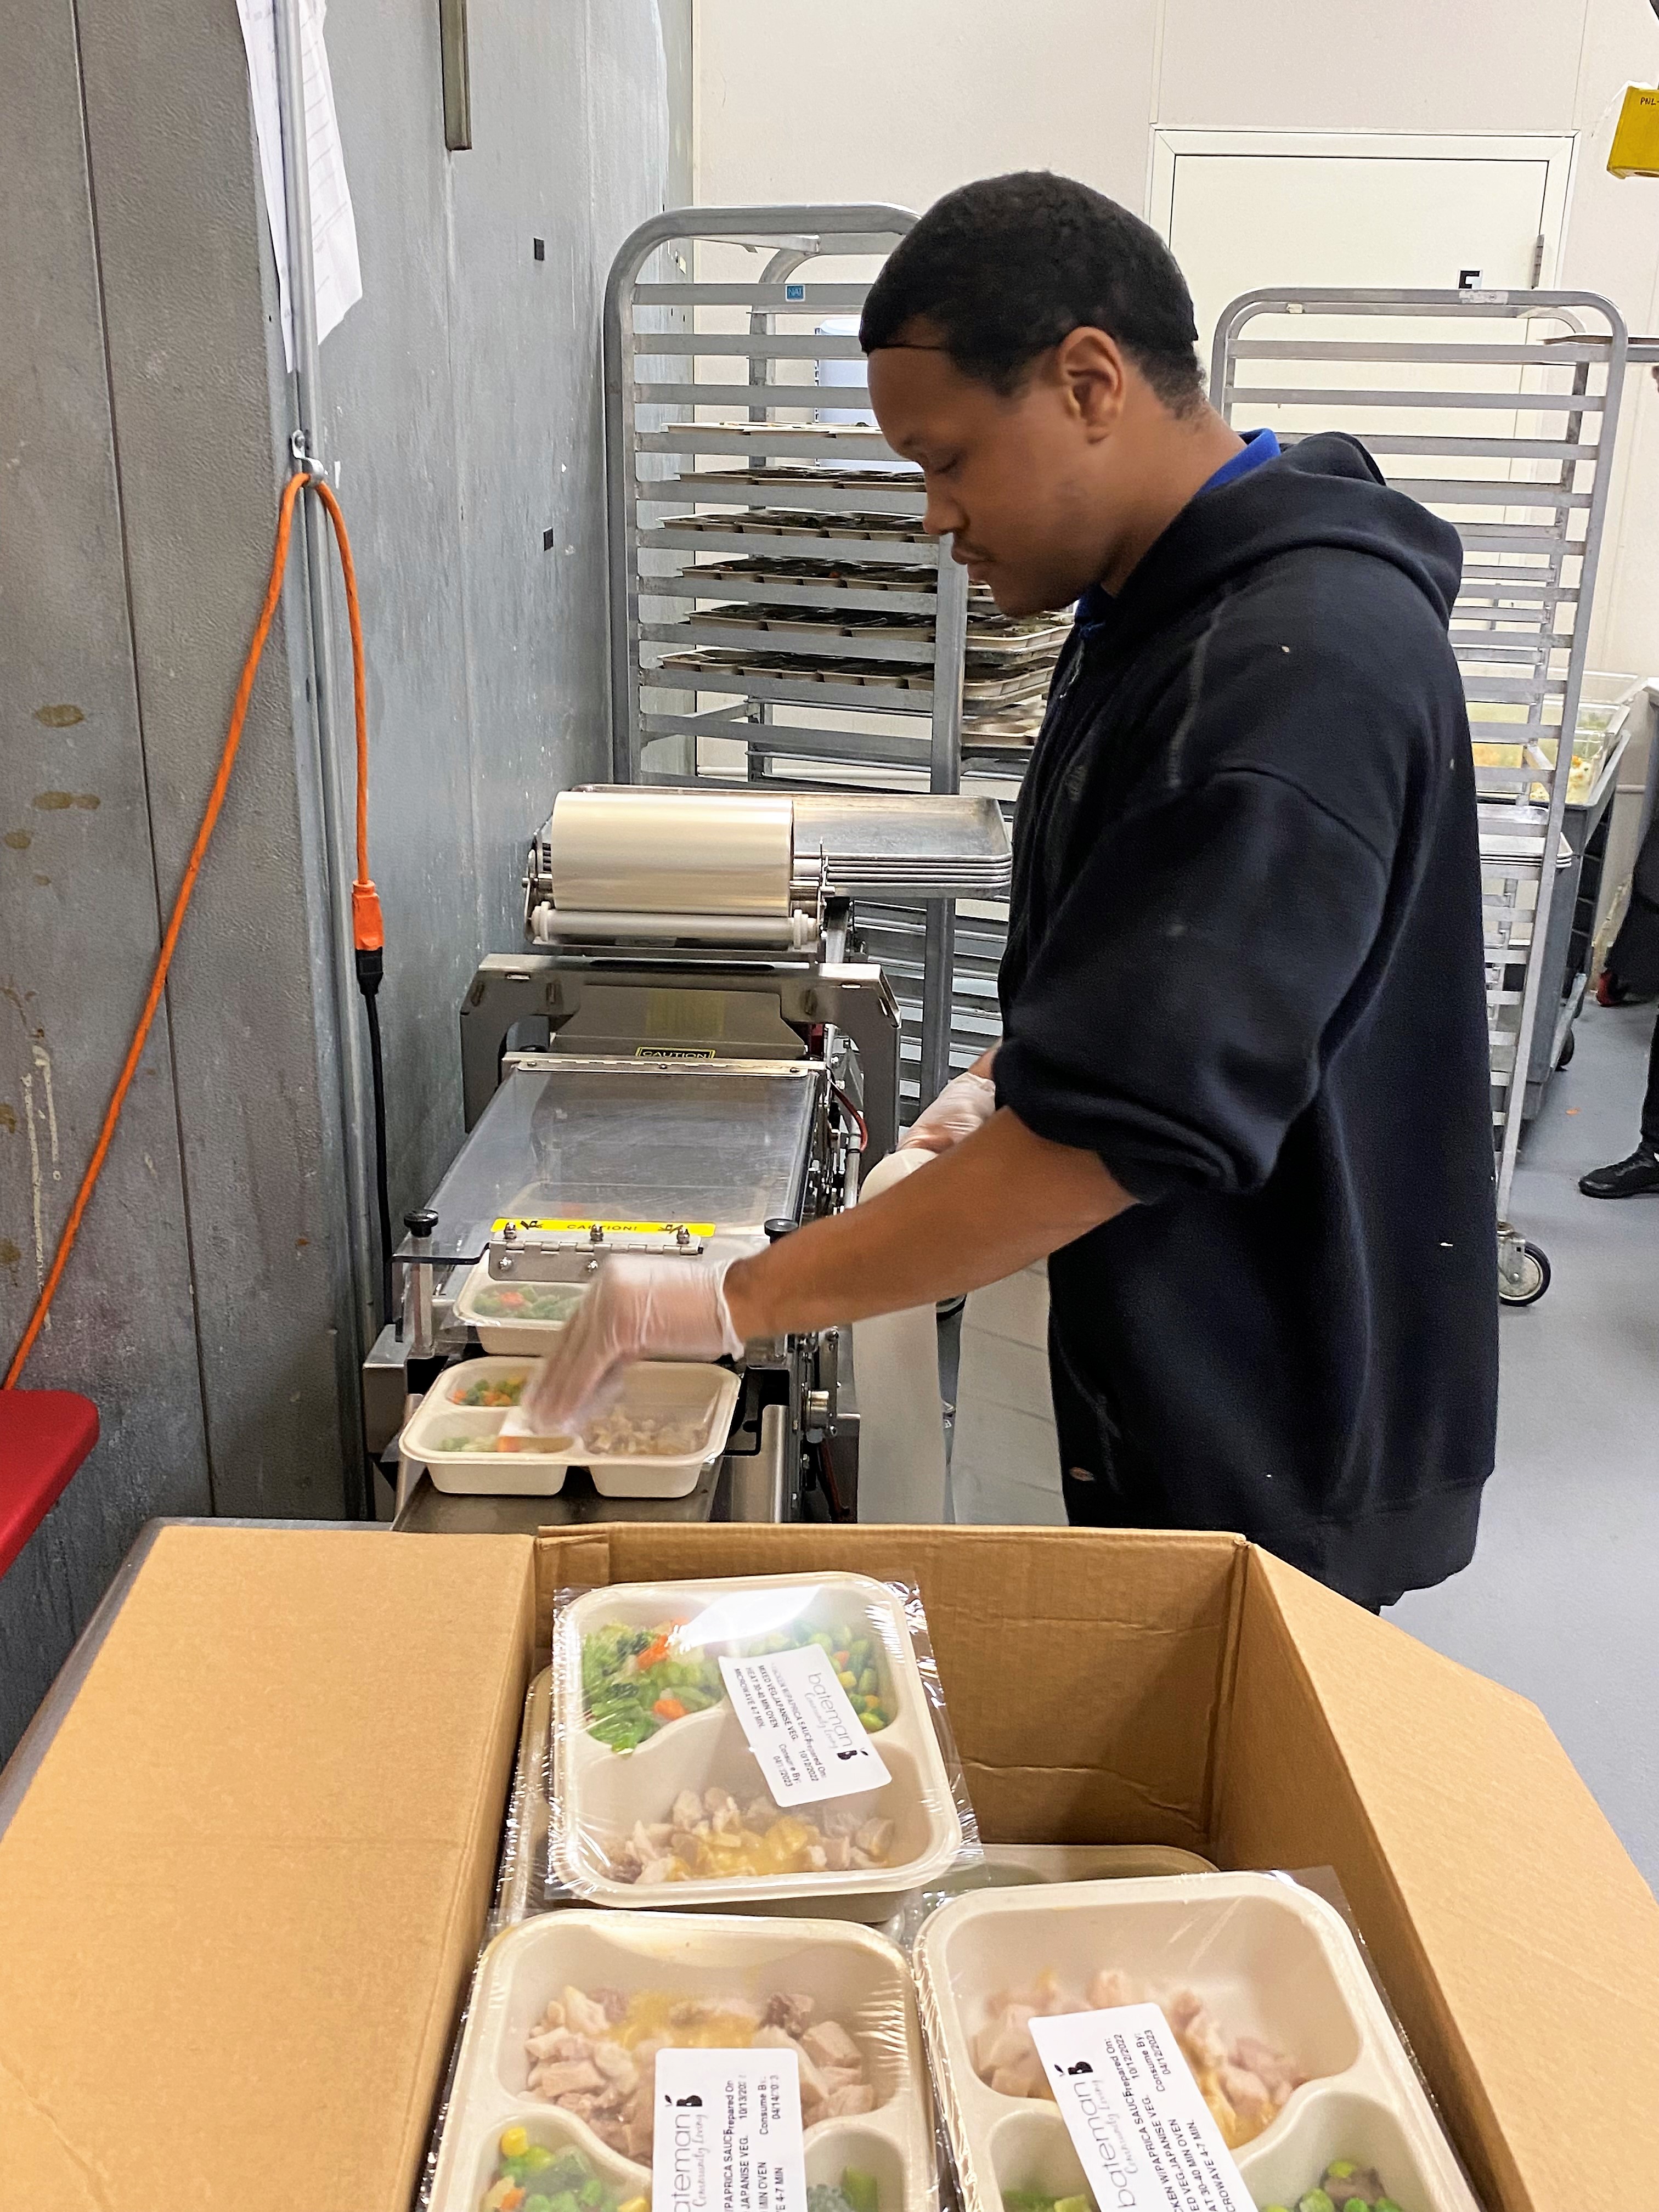 Marquez Robinson in Trio's kitchen prepping food for weekly Meals on Wheels deliveries